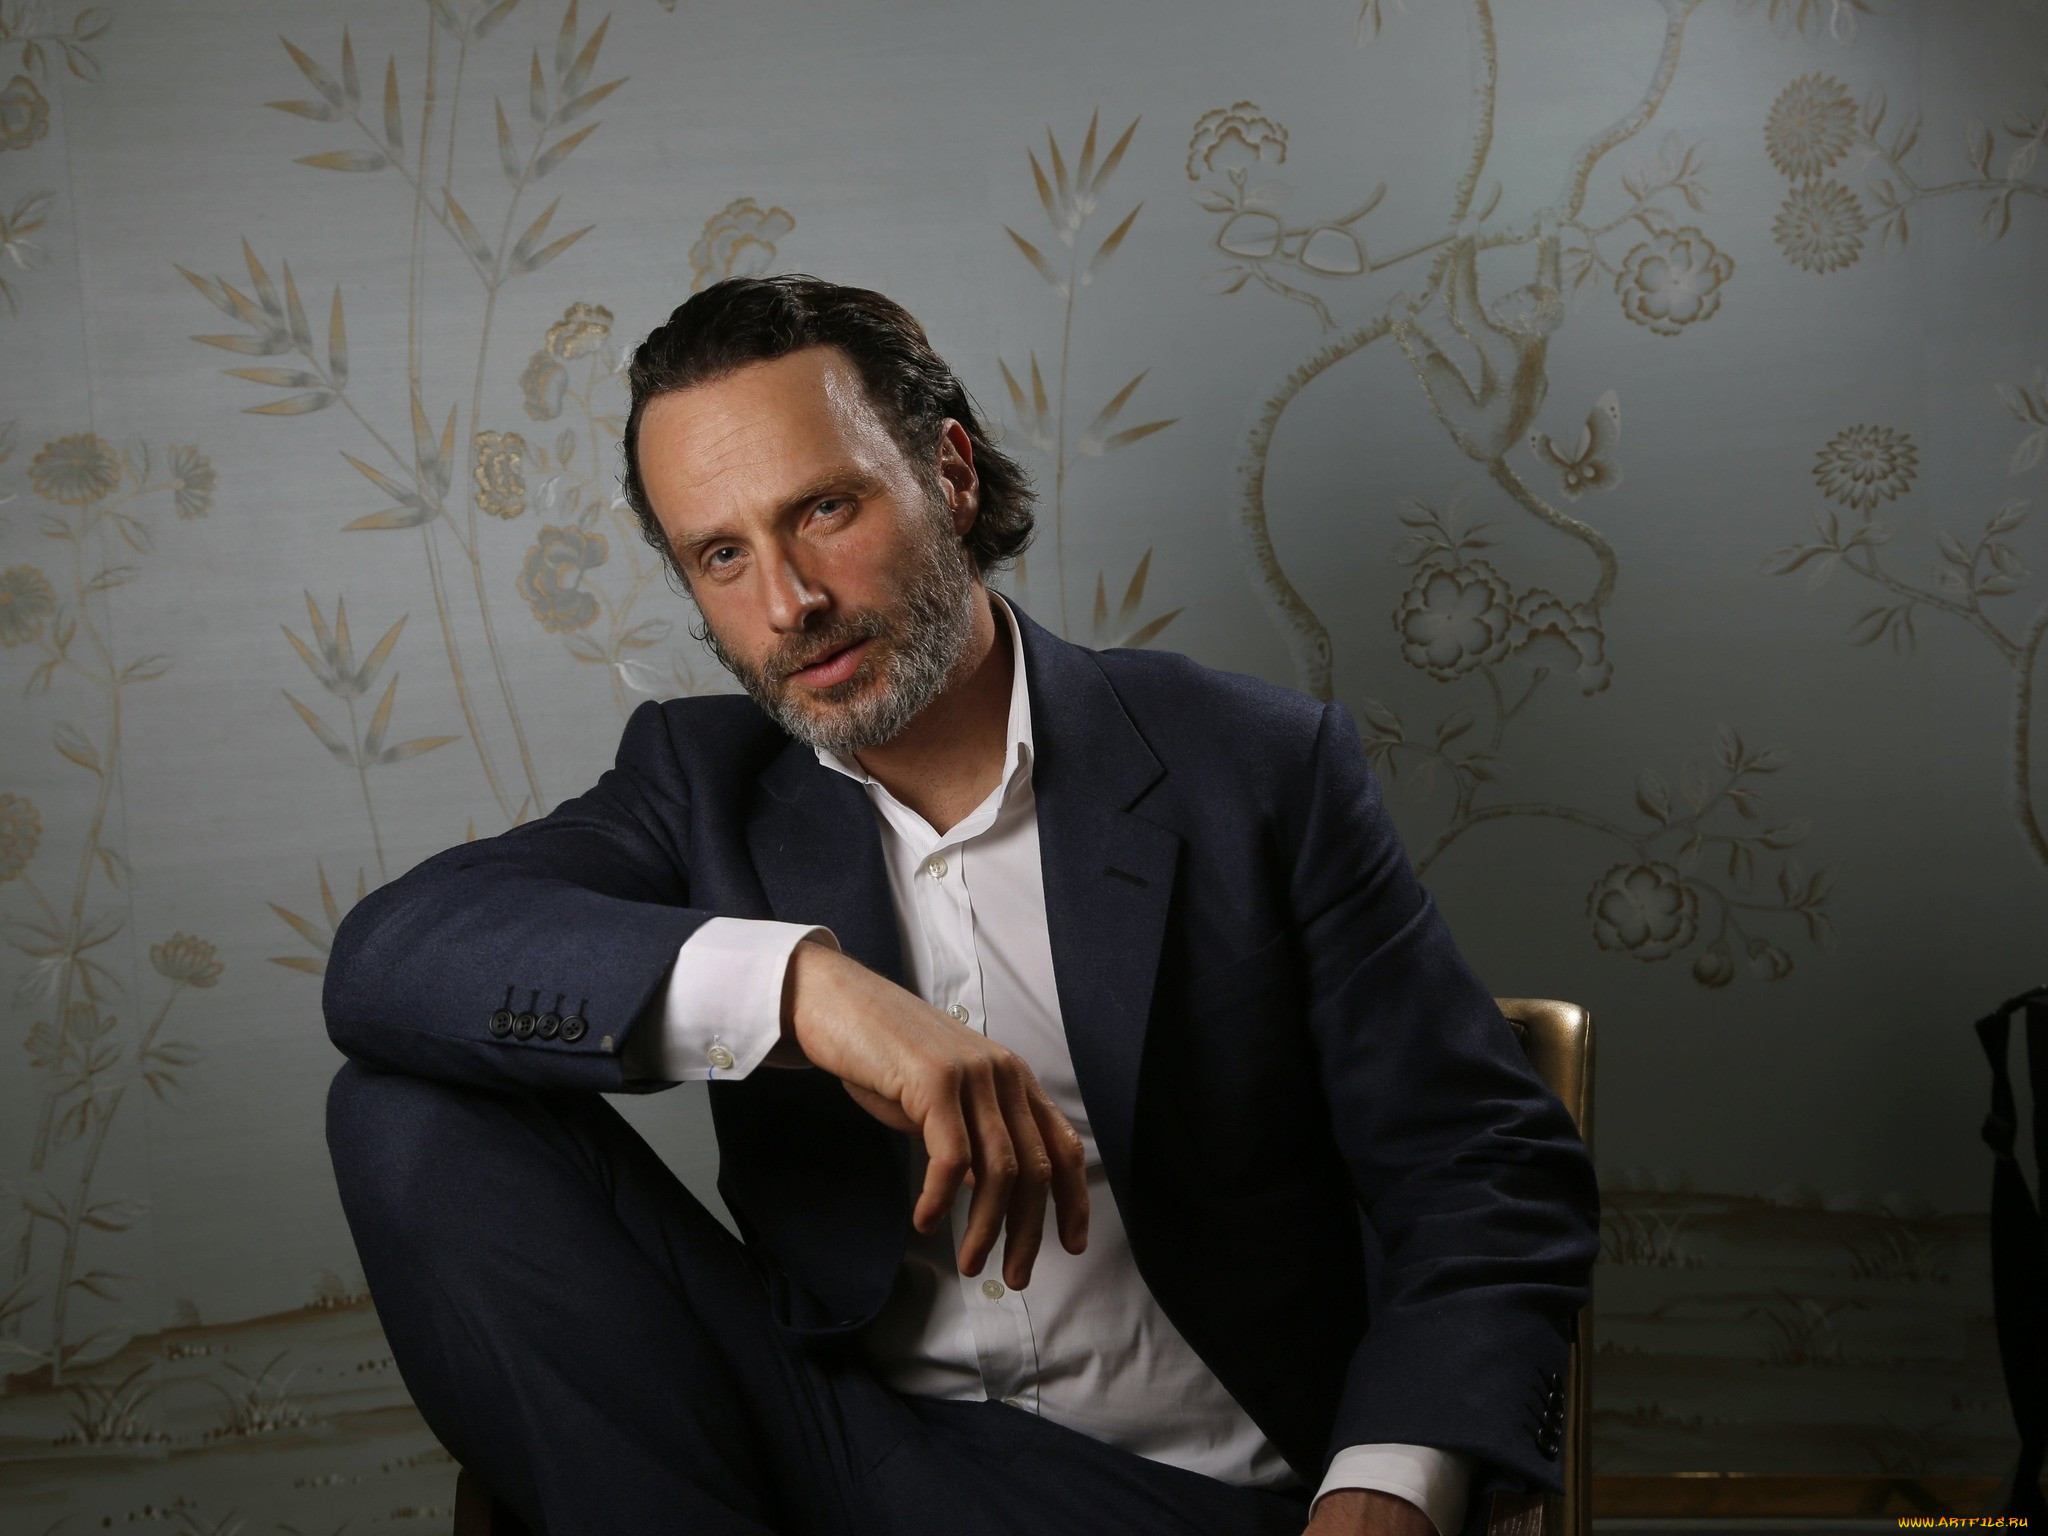 , andrew lincoln, andrew, lincoln